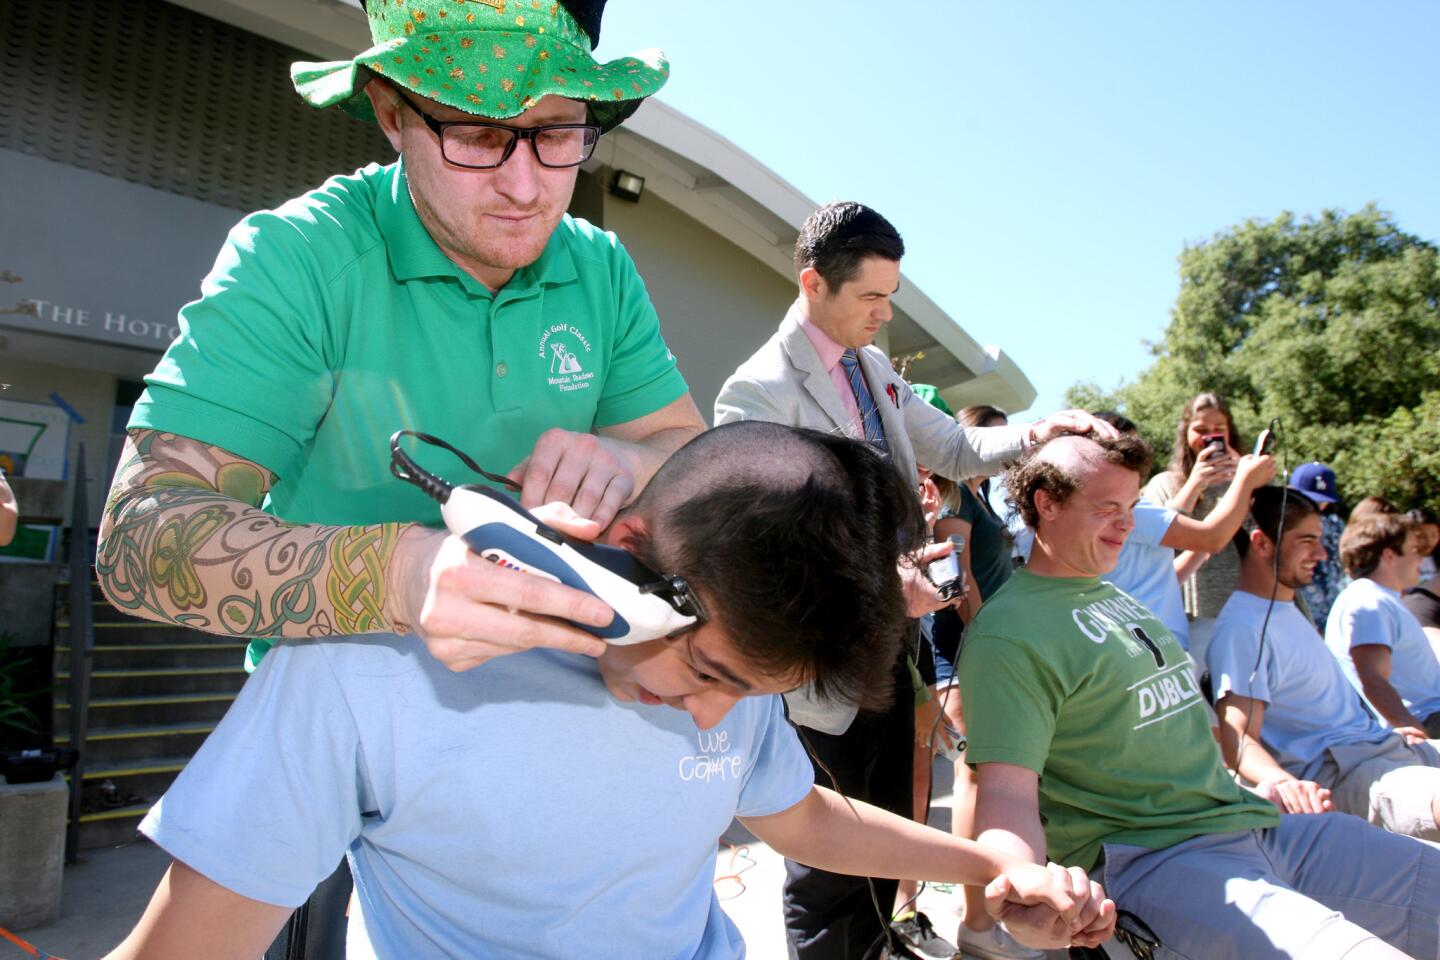 La Cañada High School student Ben Choi gets his head shaved by Bridge Program advisor Gavin Williams during fundraiser for the Baldrick's Foundation at the school in La Cañada Flintridge, on Thursday, March 17, 2016. About 20 students, a teacher and the principal participated in the fundraiser which aimed to raise about $10,000.